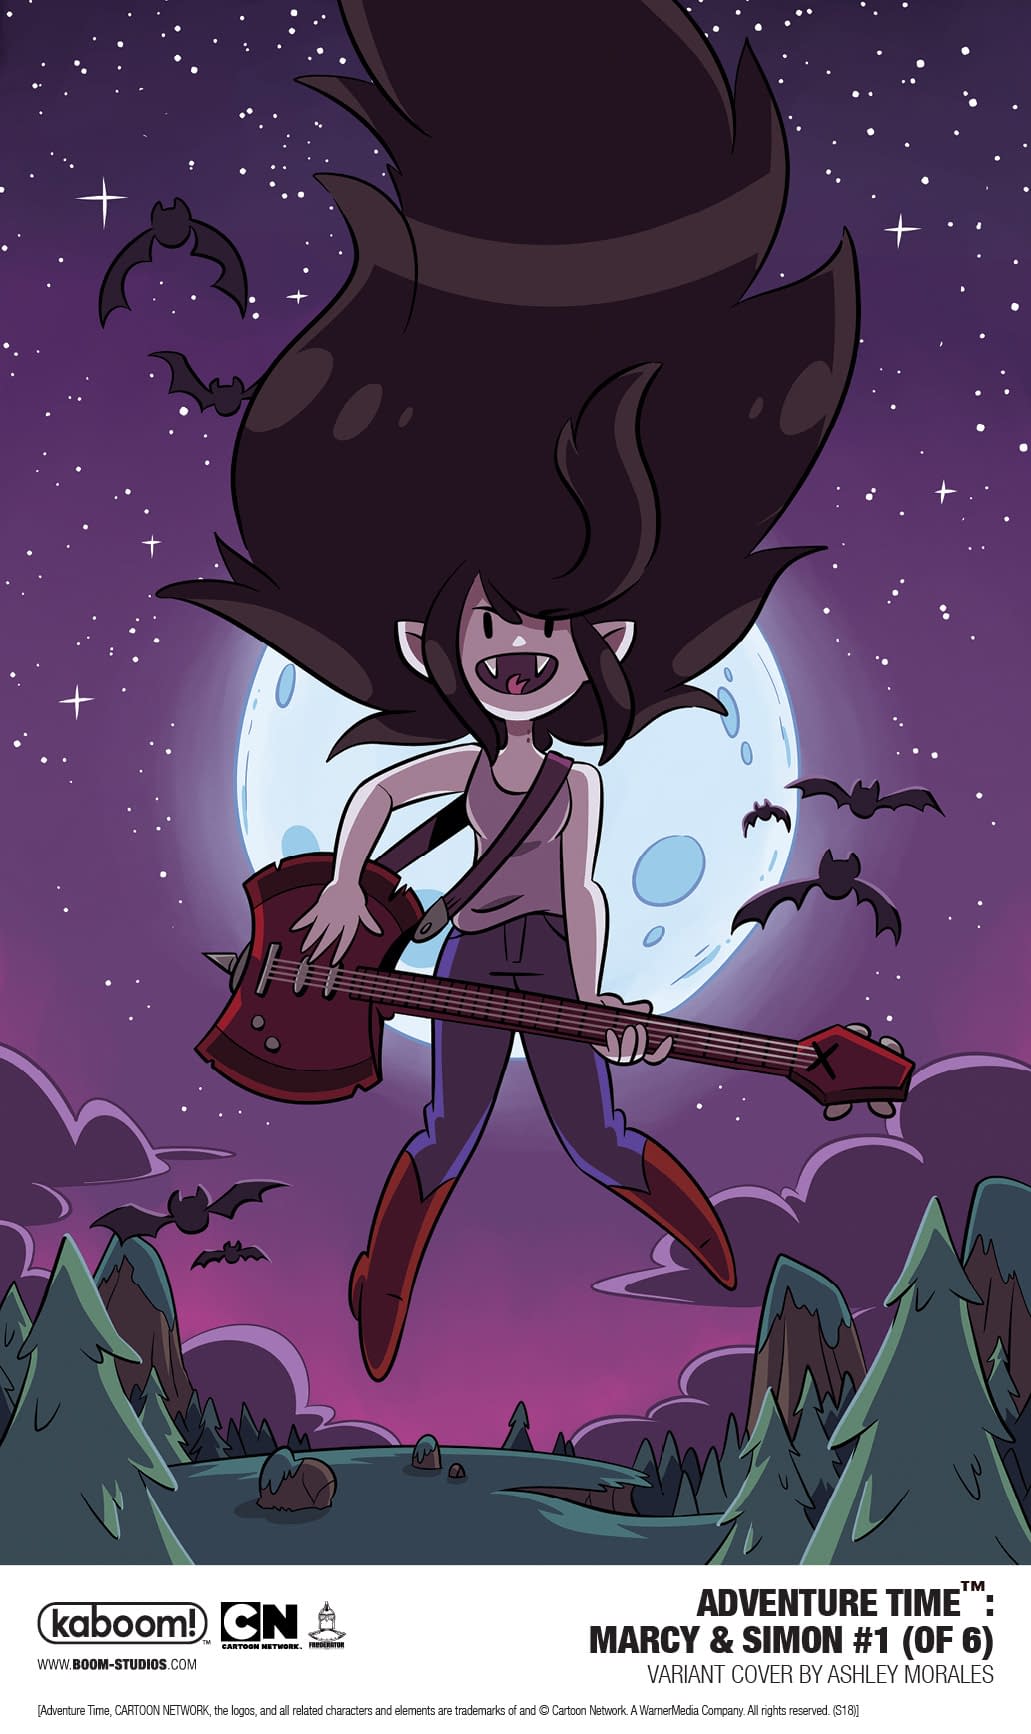 The Ice King Apology Tour Commences in 1st Look at Adventure Time: Marcy &#038; Simon #1